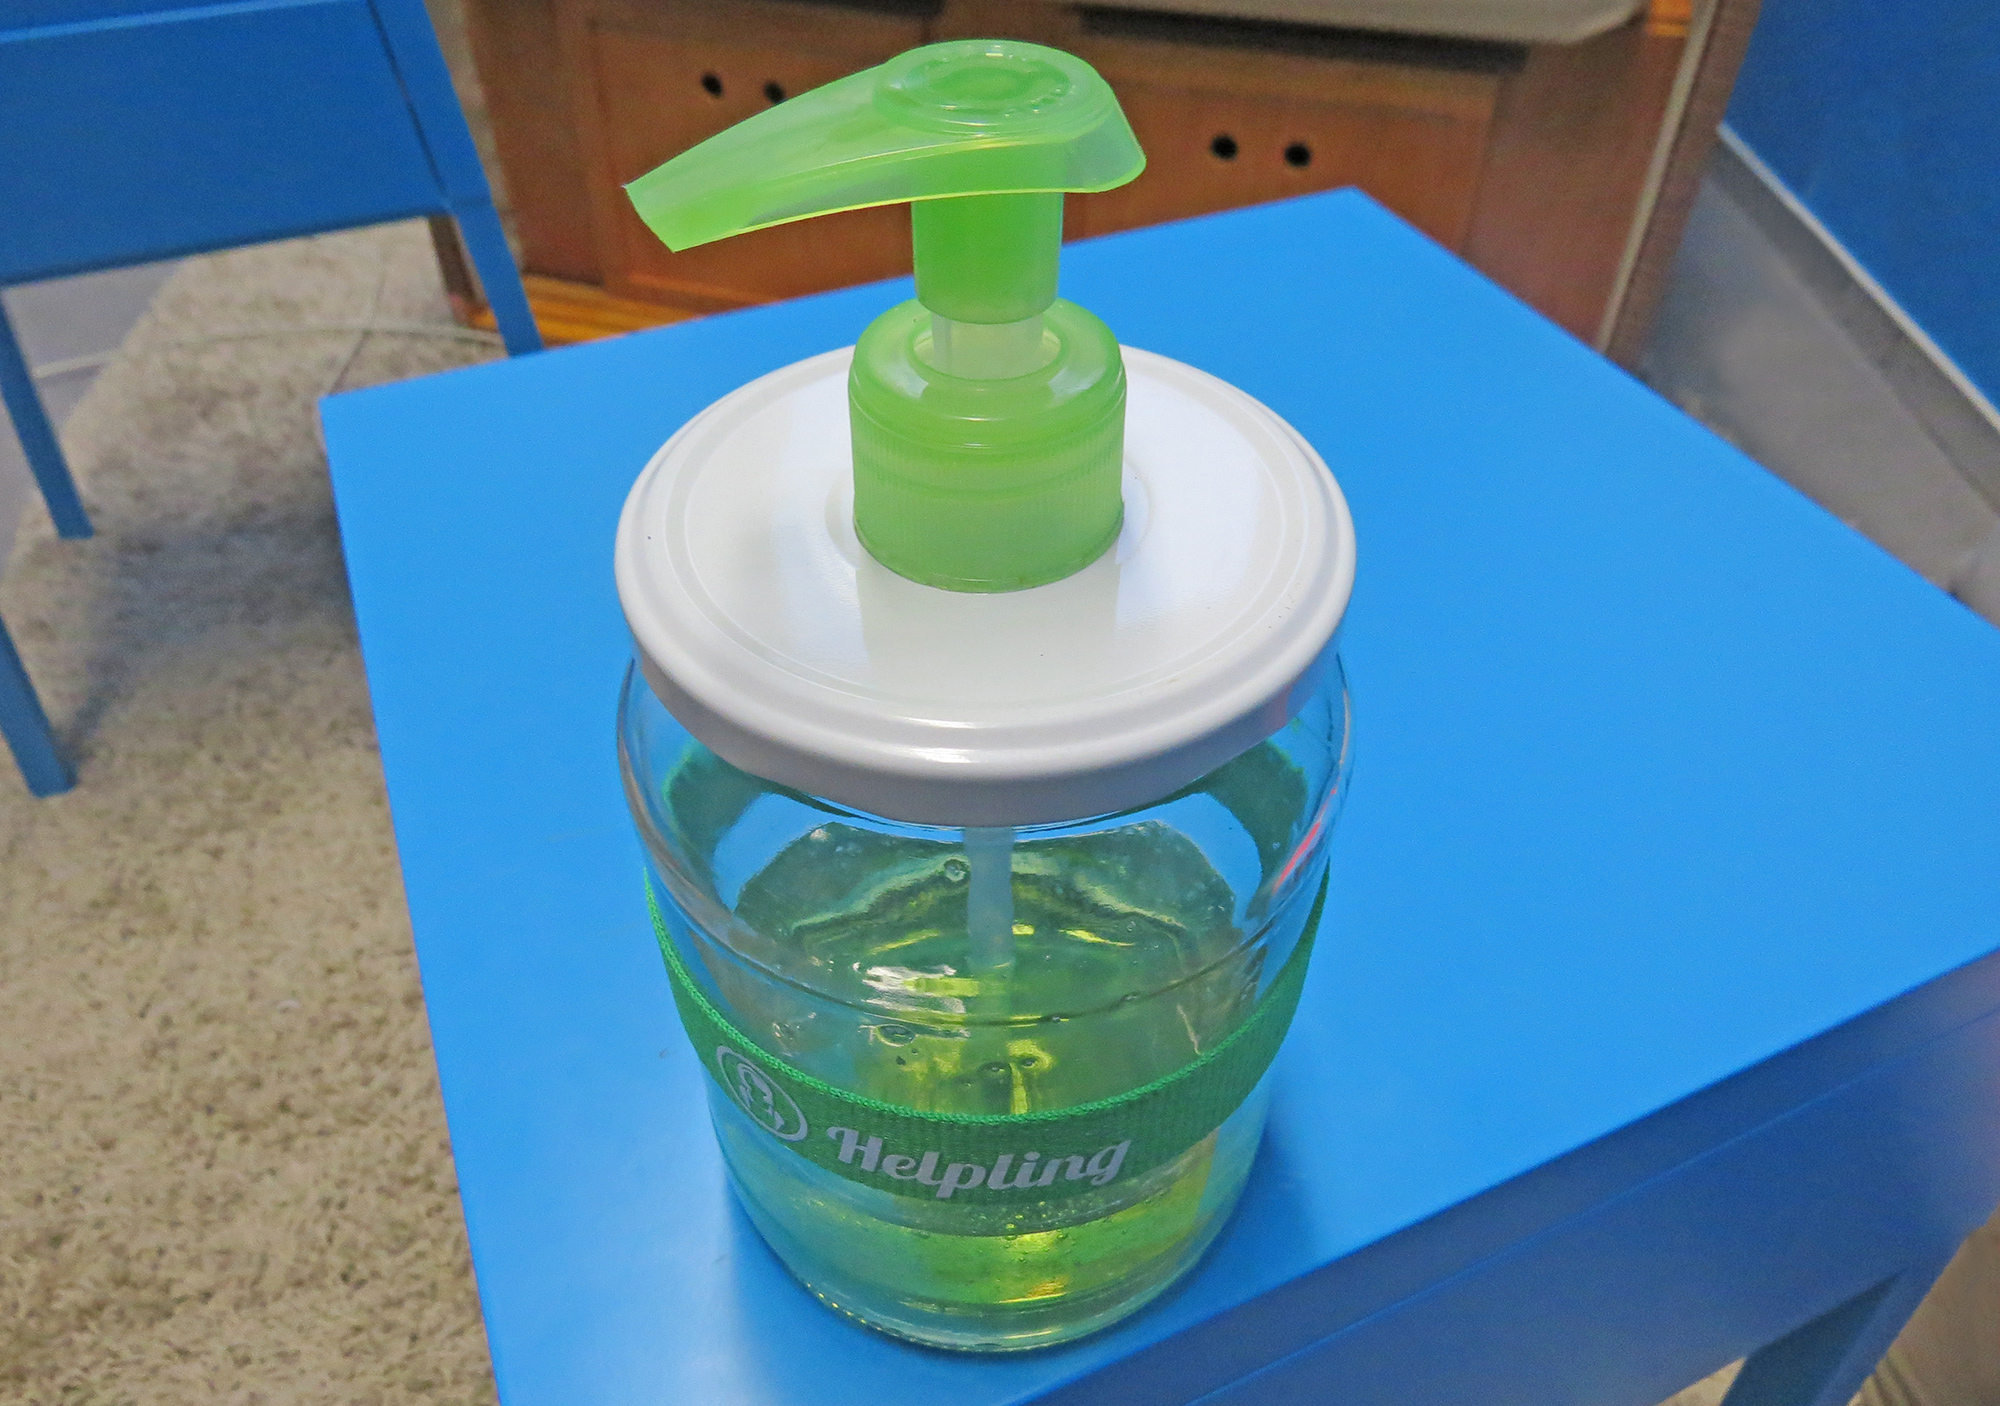 Upcycled Diy Soap Dispenser On Blue Table